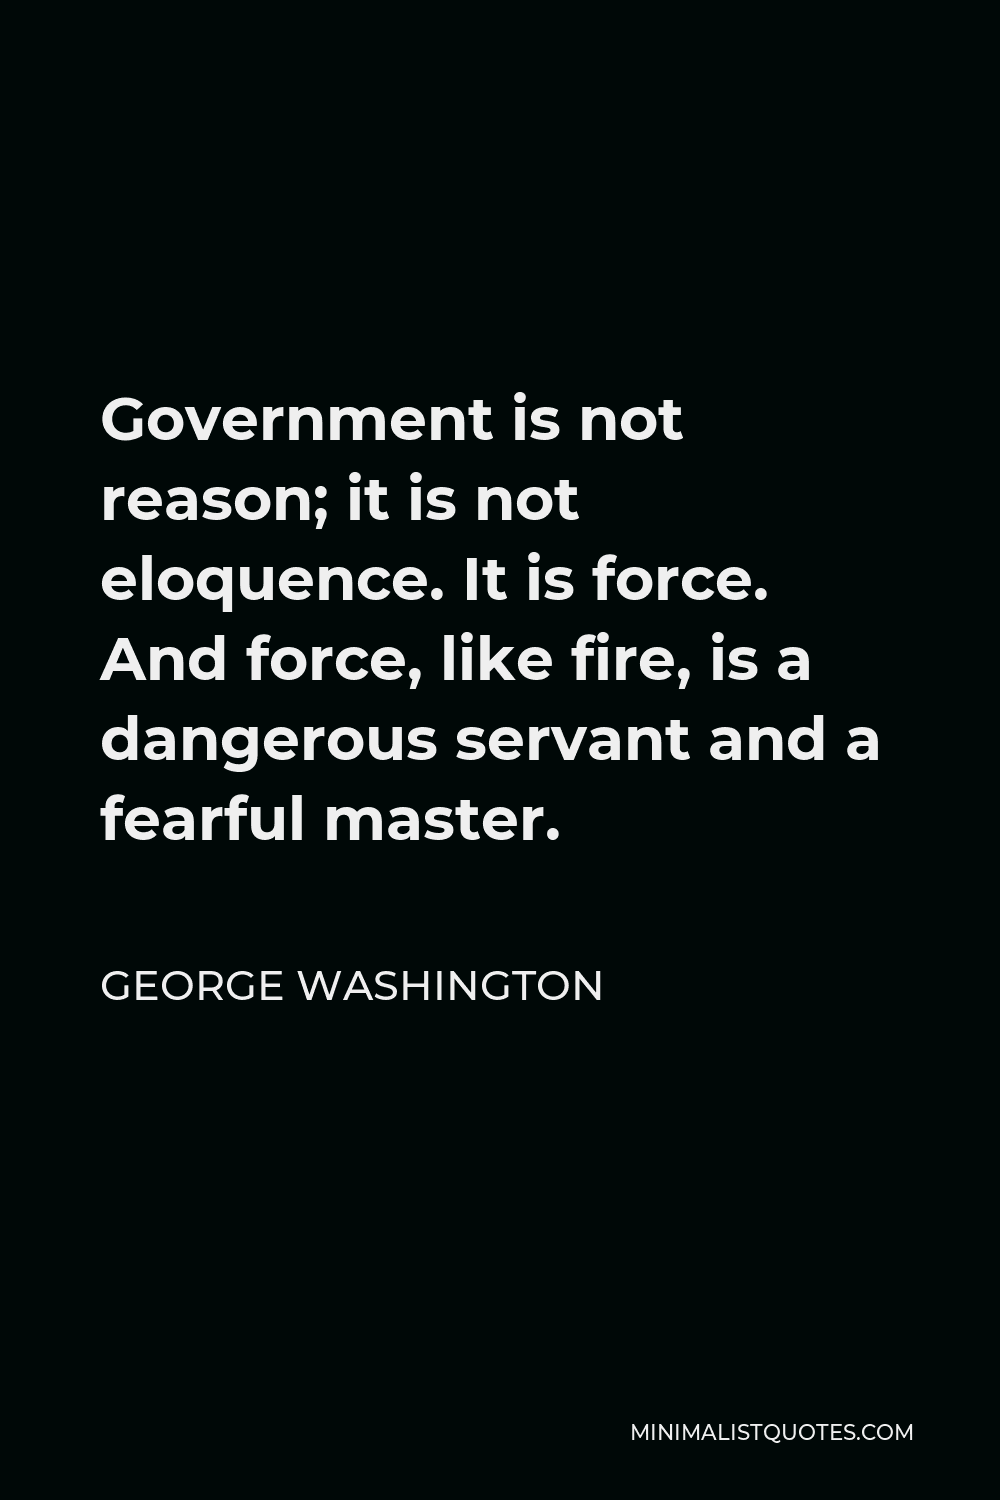 George Washington Quote - Government is not reason; it is not eloquence. It is force. And force, like fire, is a dangerous servant and a fearful master.